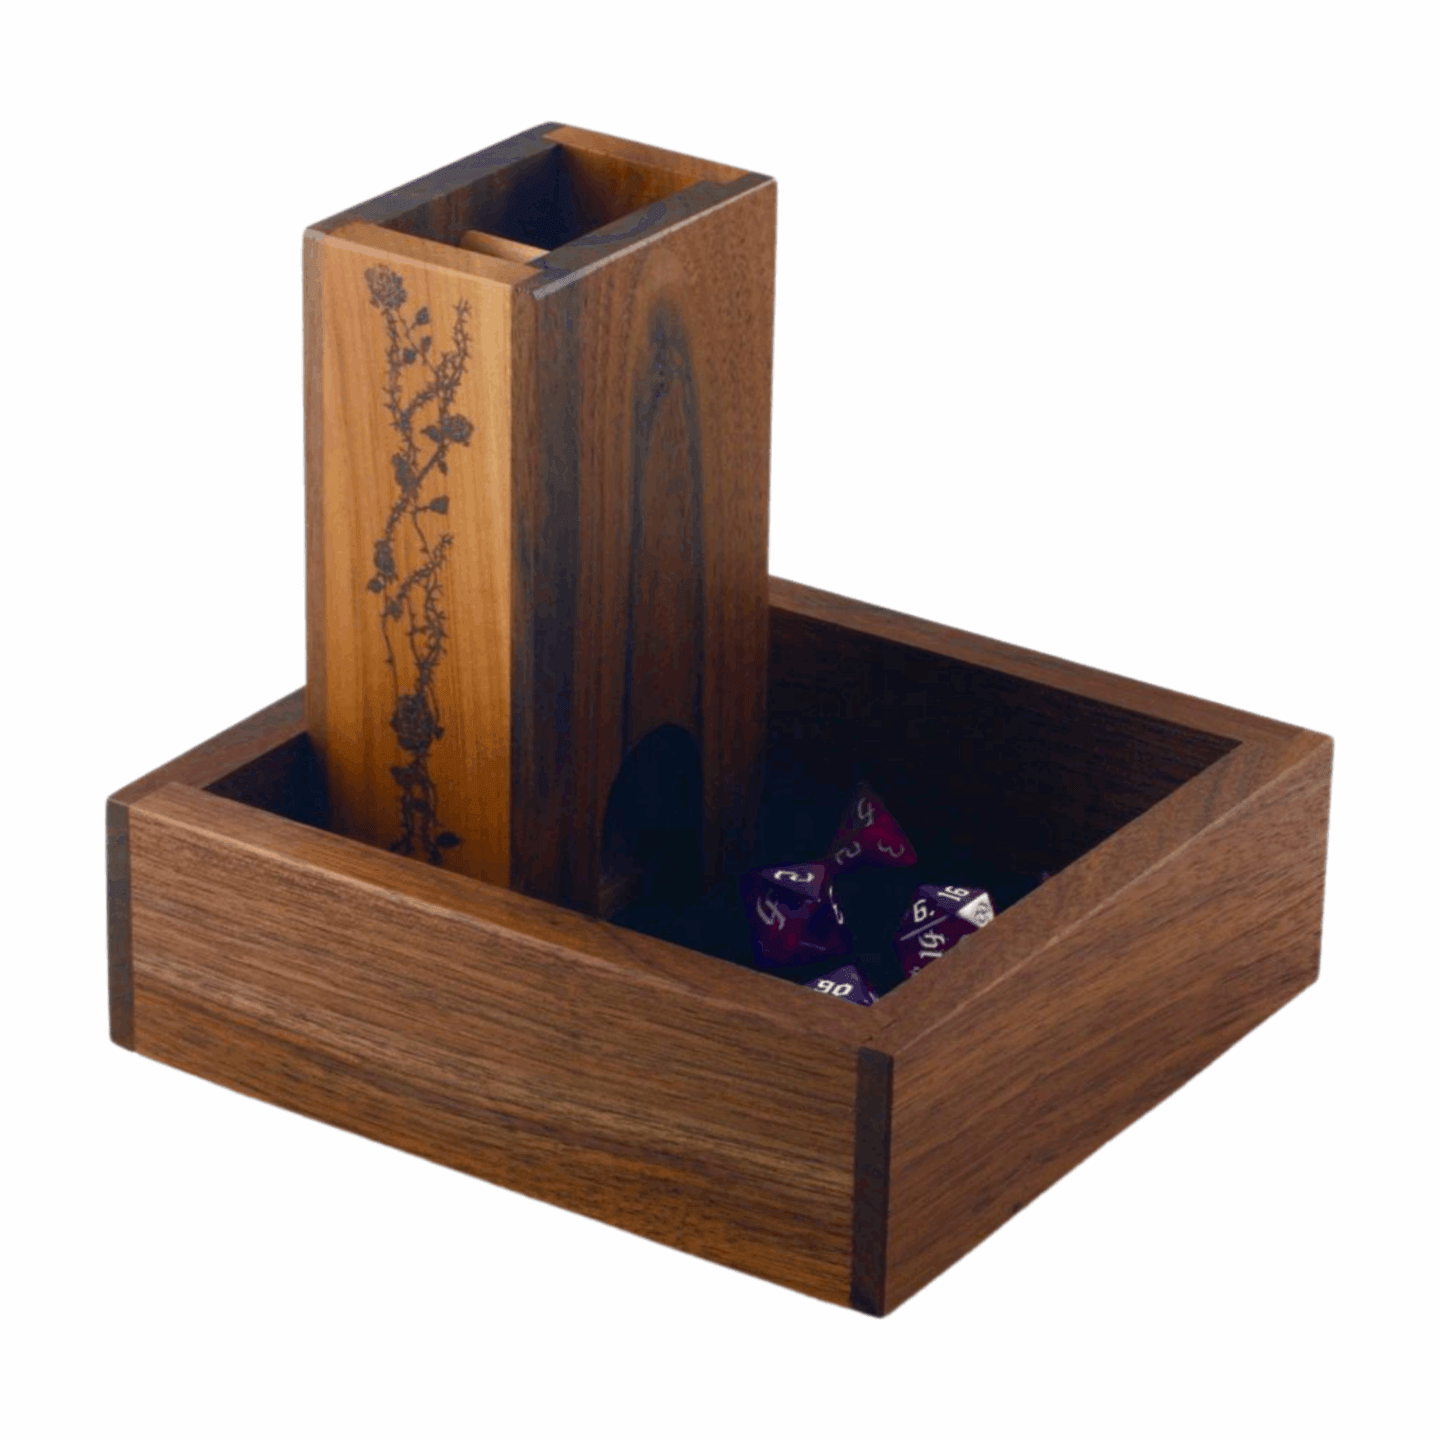 Small Walnut and Cherry Dice Tower with Roses - Dragon Armor Games